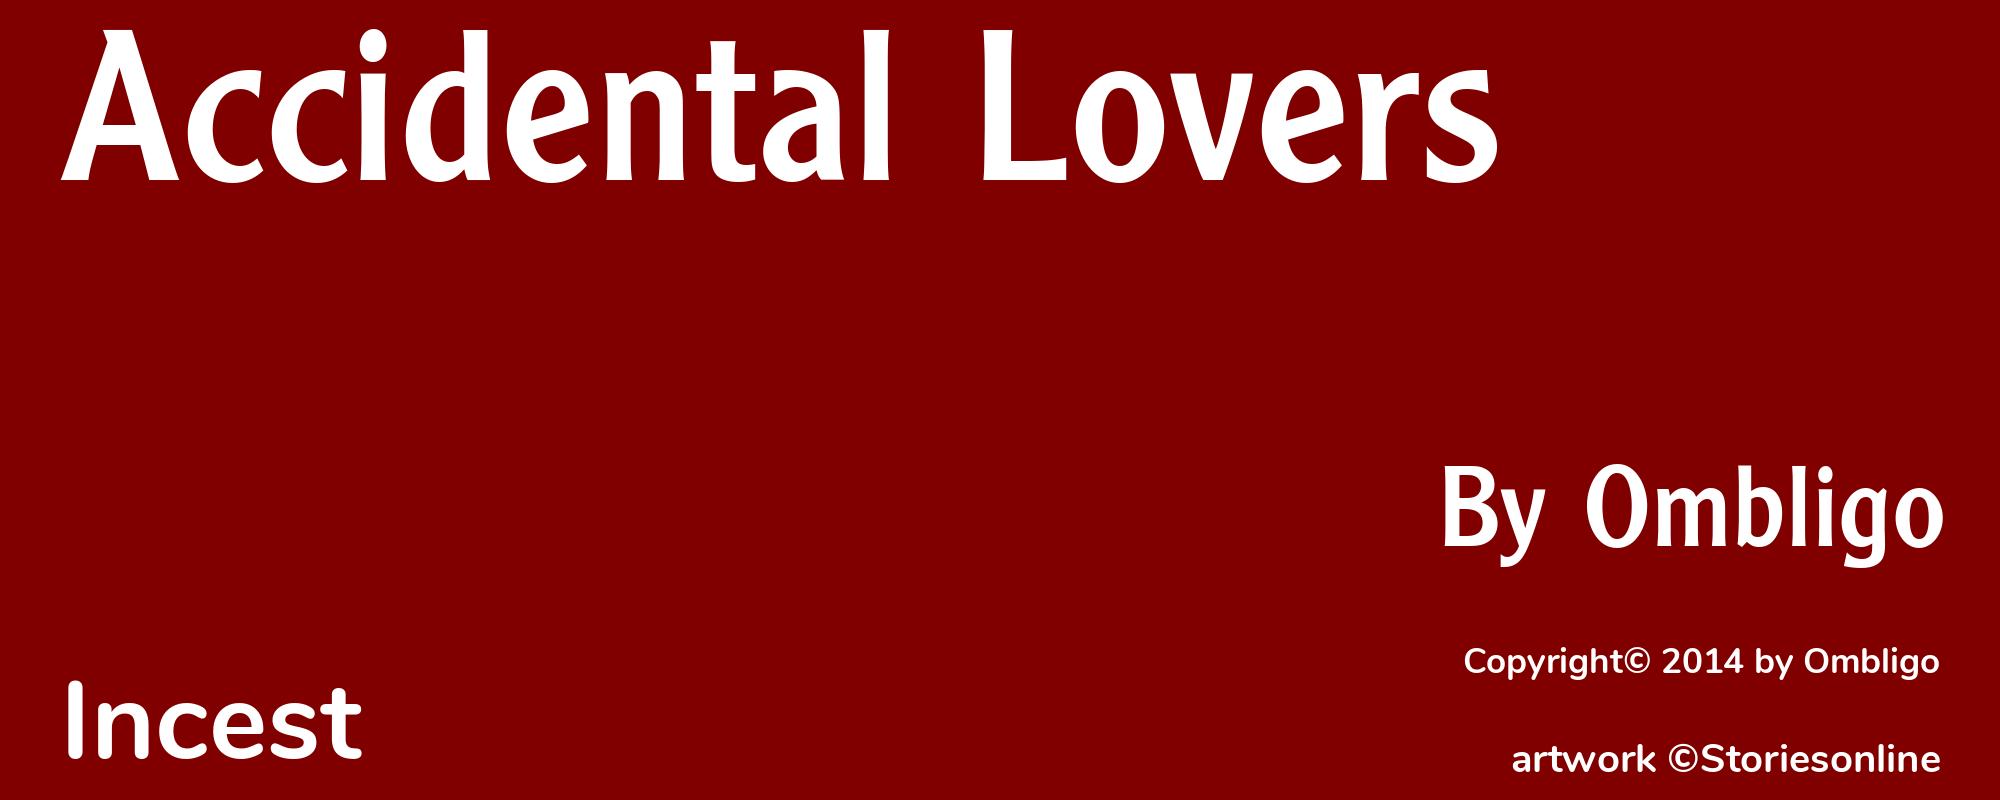 Accidental Lovers - Cover